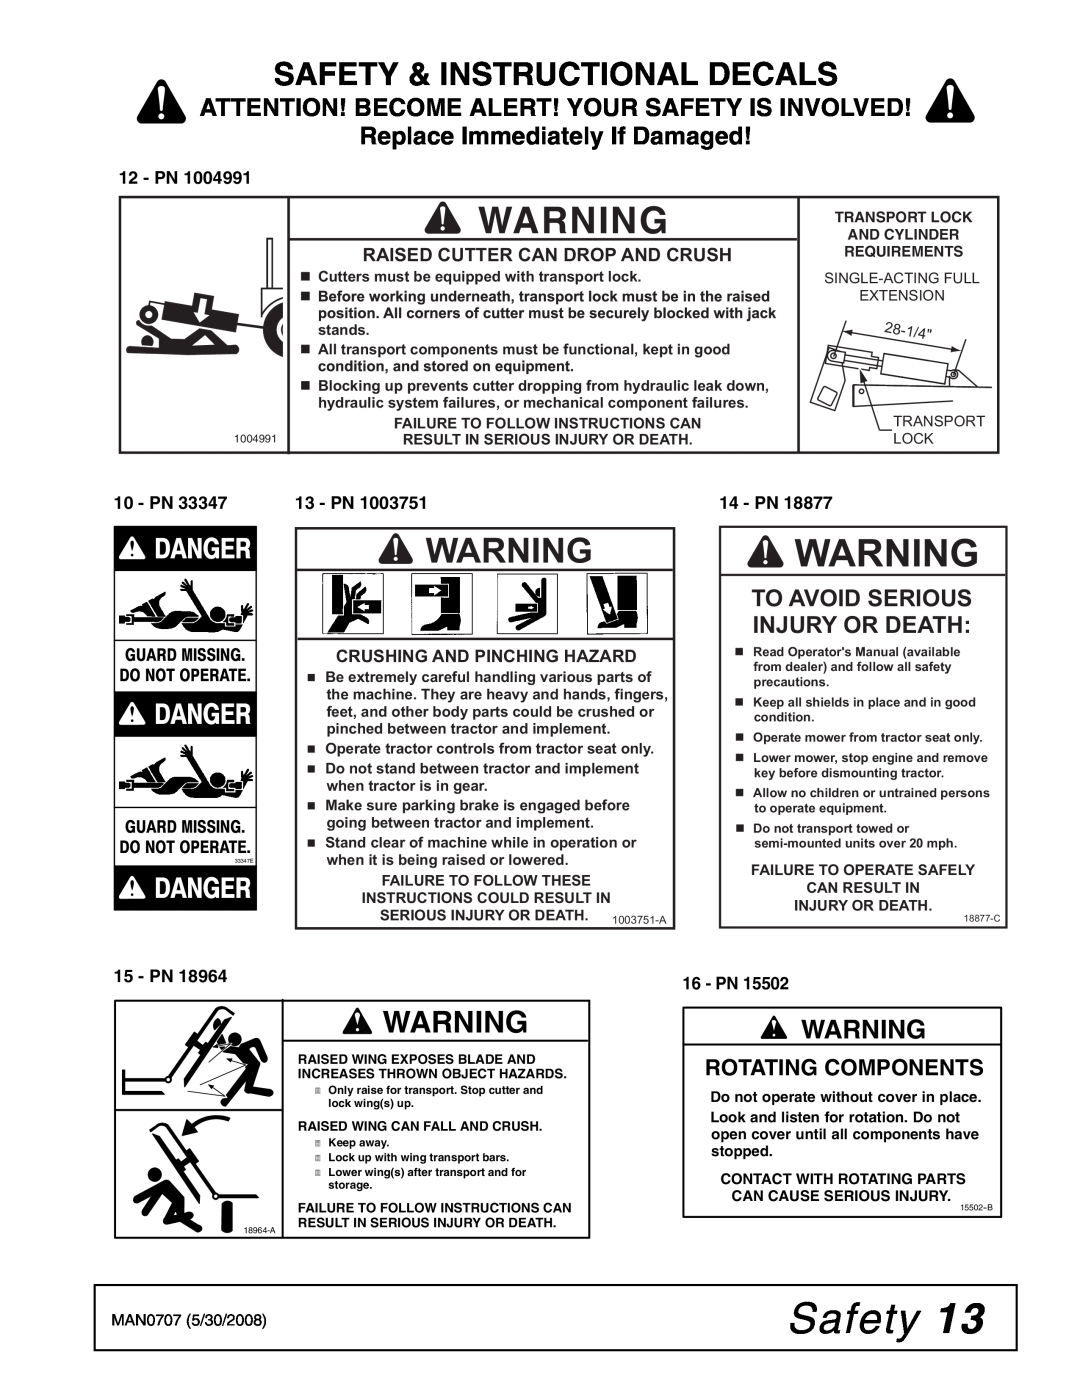 Woods Equipment BW126-3 Safety & Instructional Decals, 33347E, Attention! Become Alert! Your Safety Is Involved, Pn 